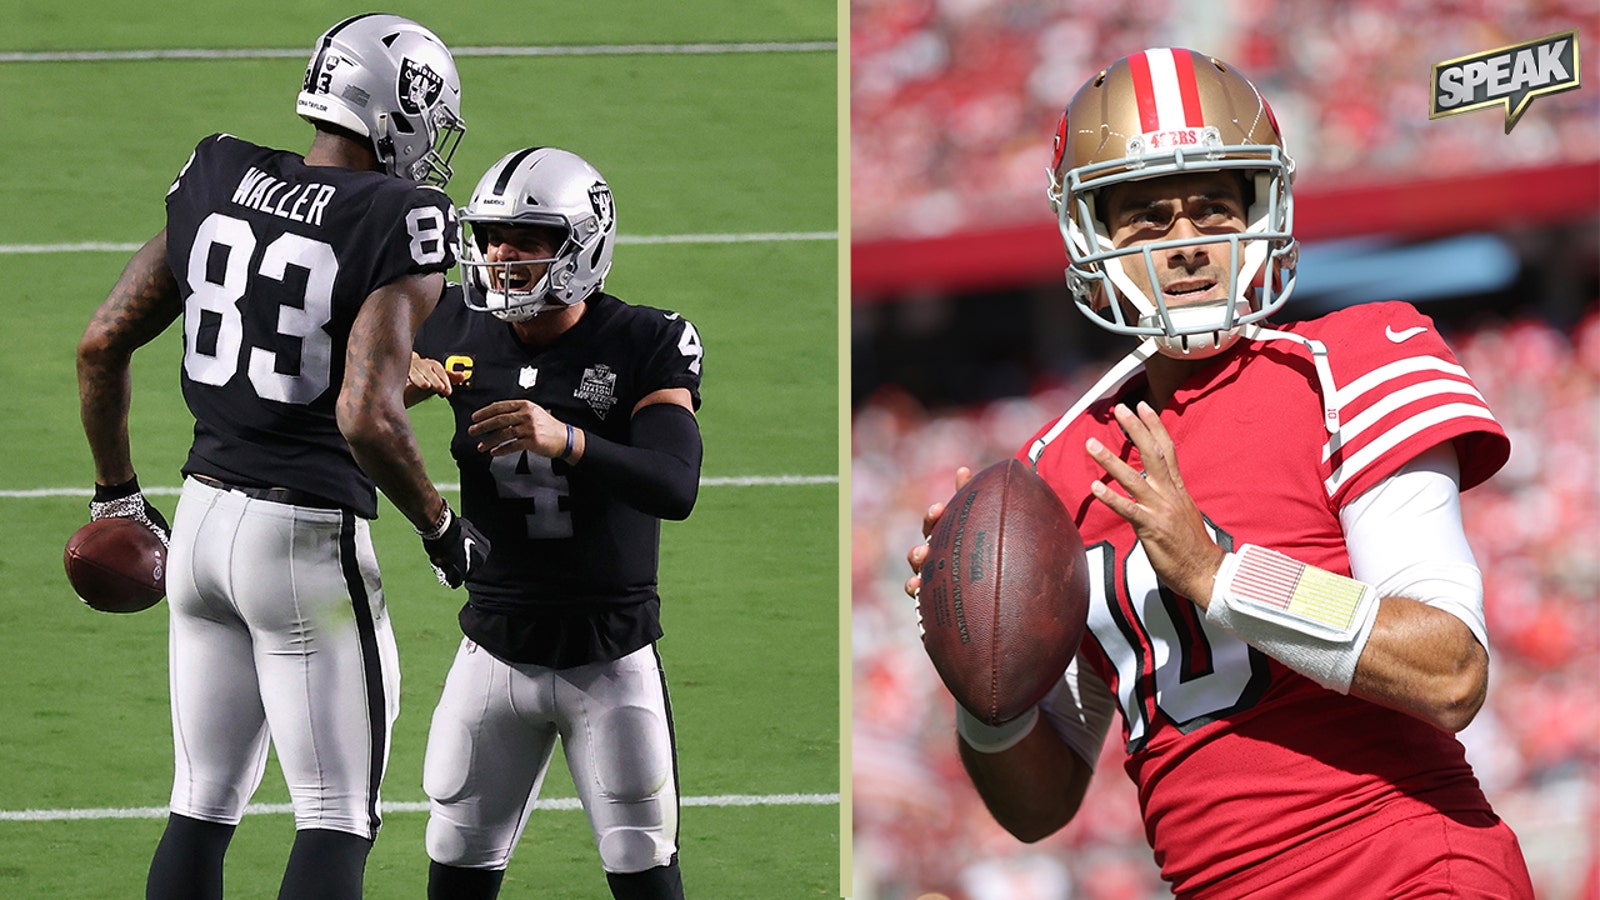 Where will the Raiders finish in the AFC West after Jimmy G, Darren Waller move?